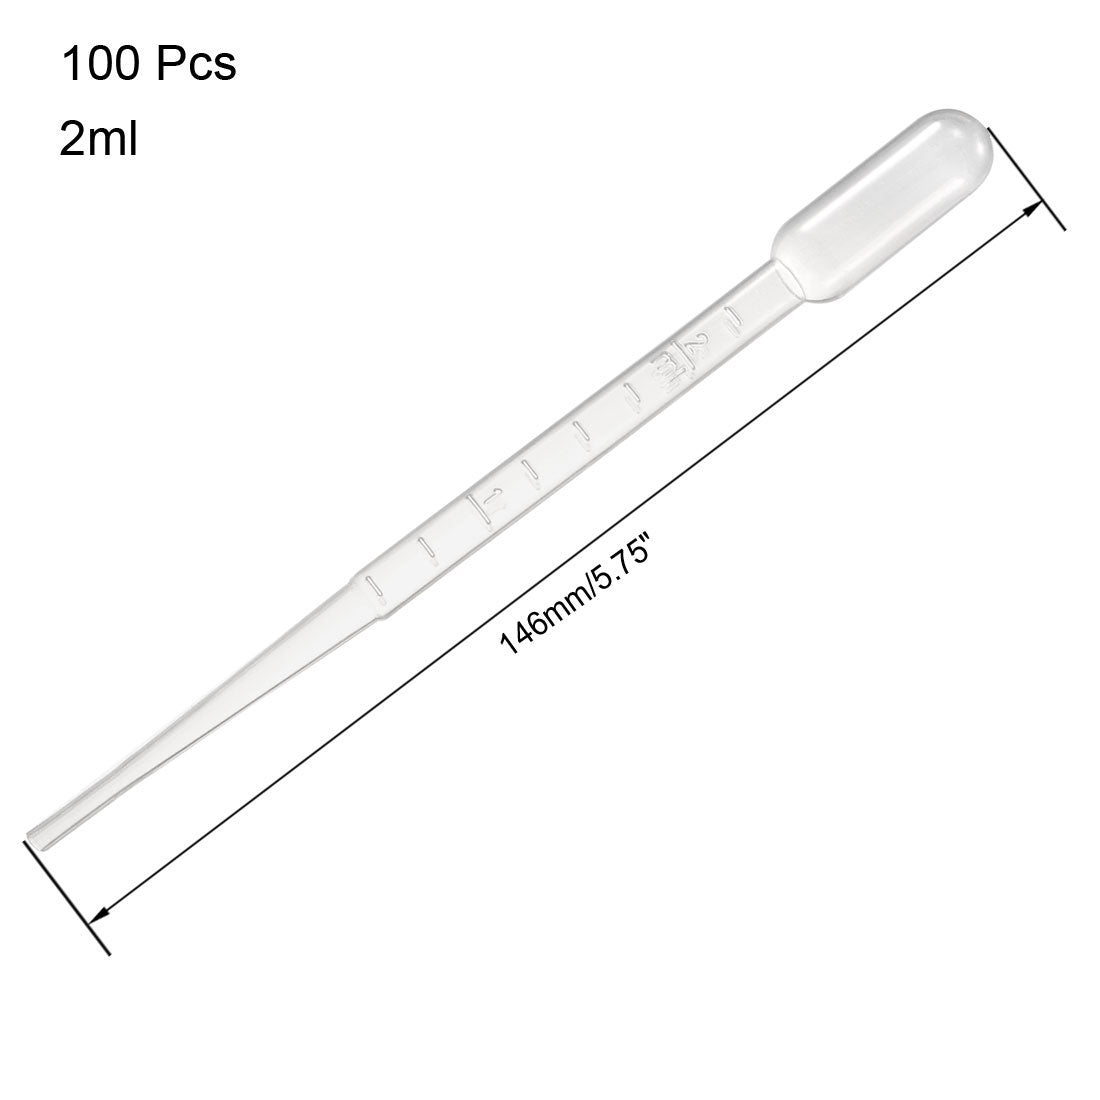 uxcell Uxcell 100 Pcs 2ml Disposable Pasteur Pipettes Test Tubes Liquid Drop Droppers Graduated 146mm Long